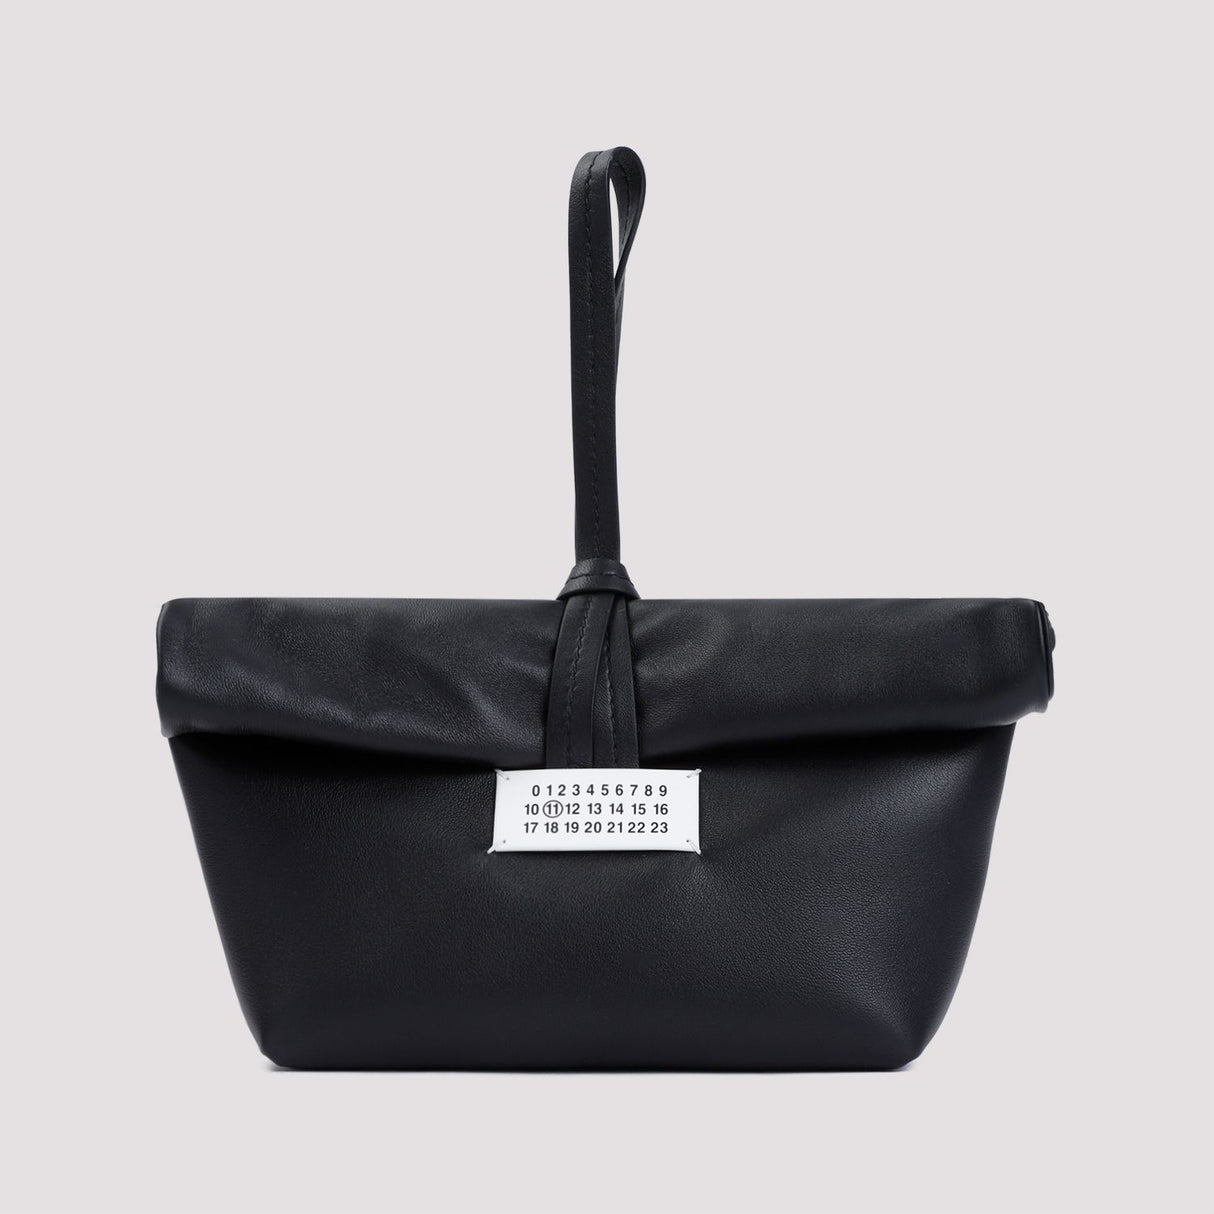 MAISON MARGIELA Black Leather Clutch Handbag for Men and Women | Roll-Top Closure with Brand Logo